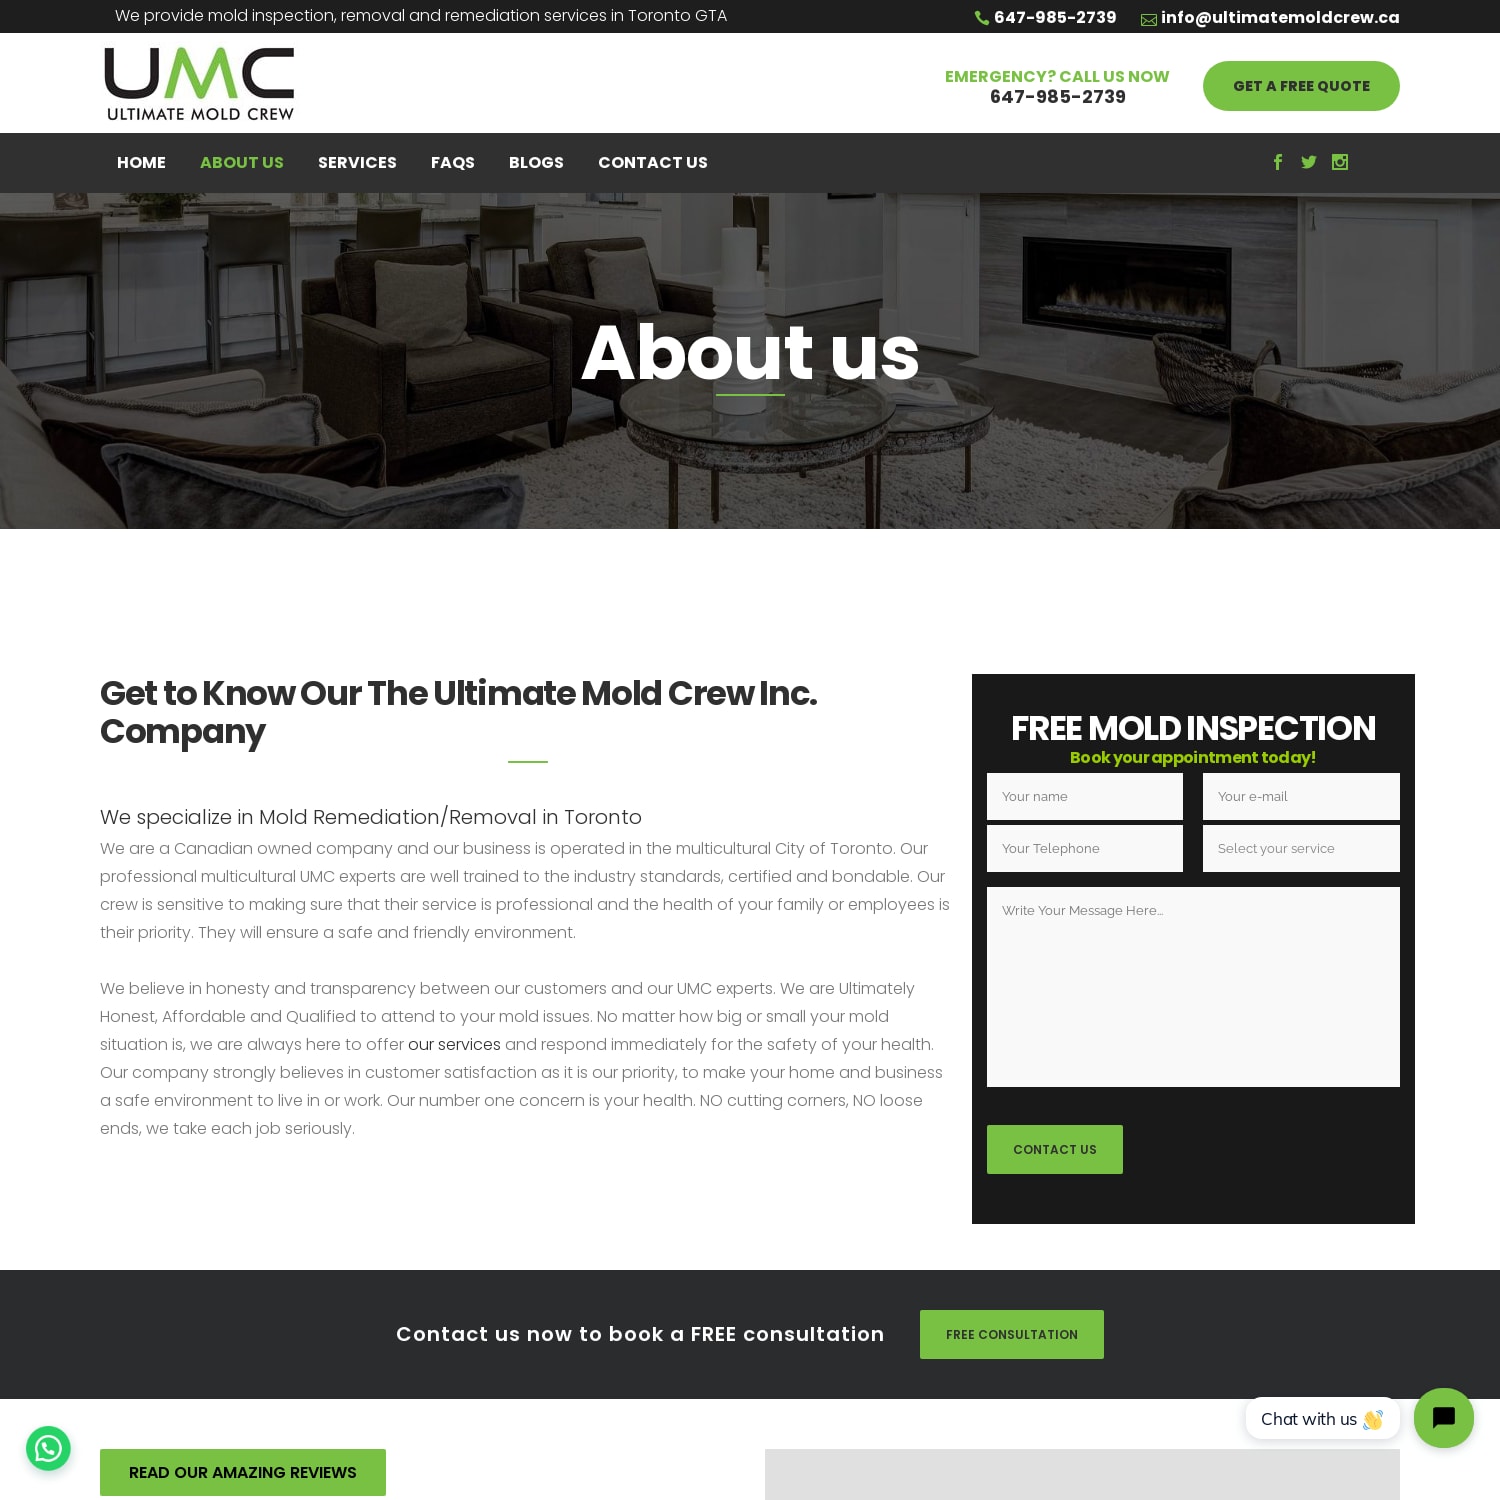 The Ultimate Mold Crew Inc. - Toronto Mold Removal & Remediation Services